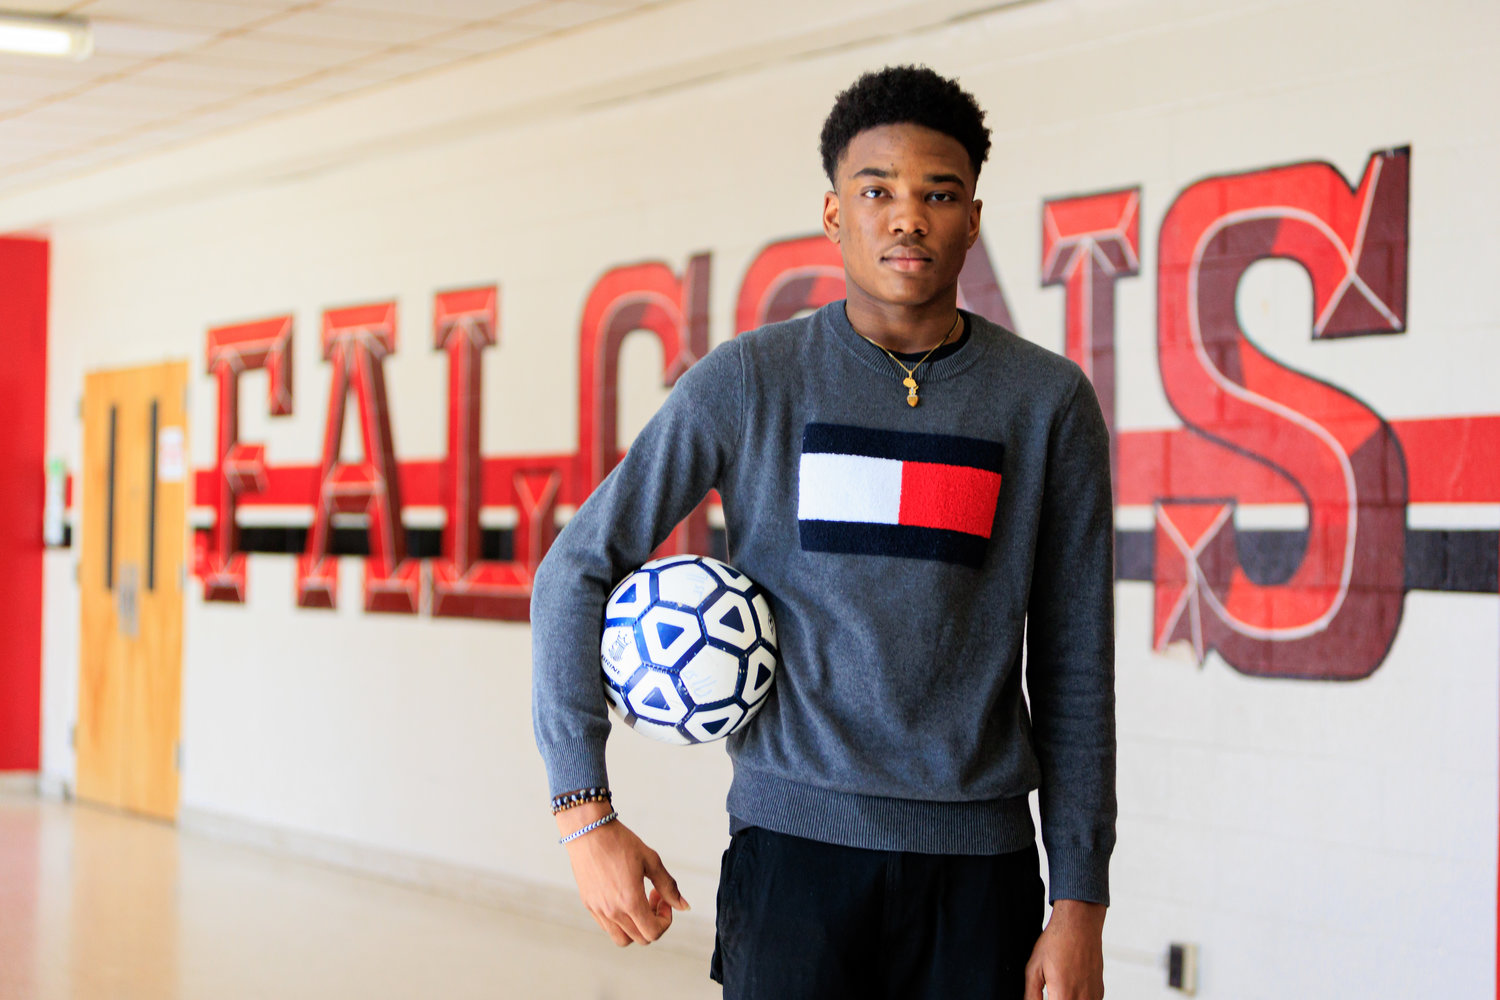 Adejuwon Balogun credits his soccer coach for building his confidence. He graduated from Seventy-First High School this month ranked seventh in his class.